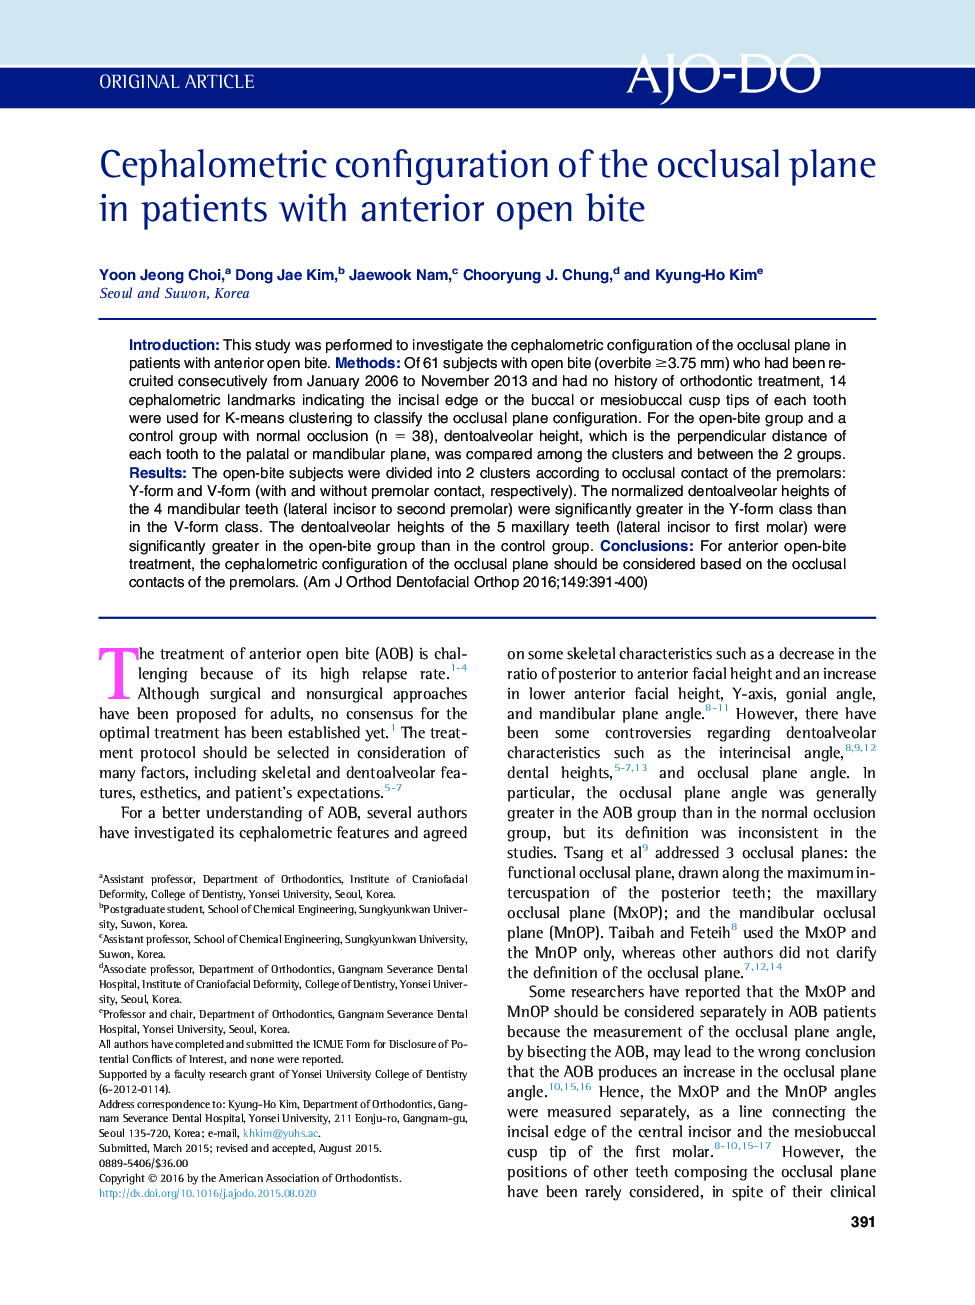 Cephalometric configuration of the occlusal plane in patients with anterior open bite 